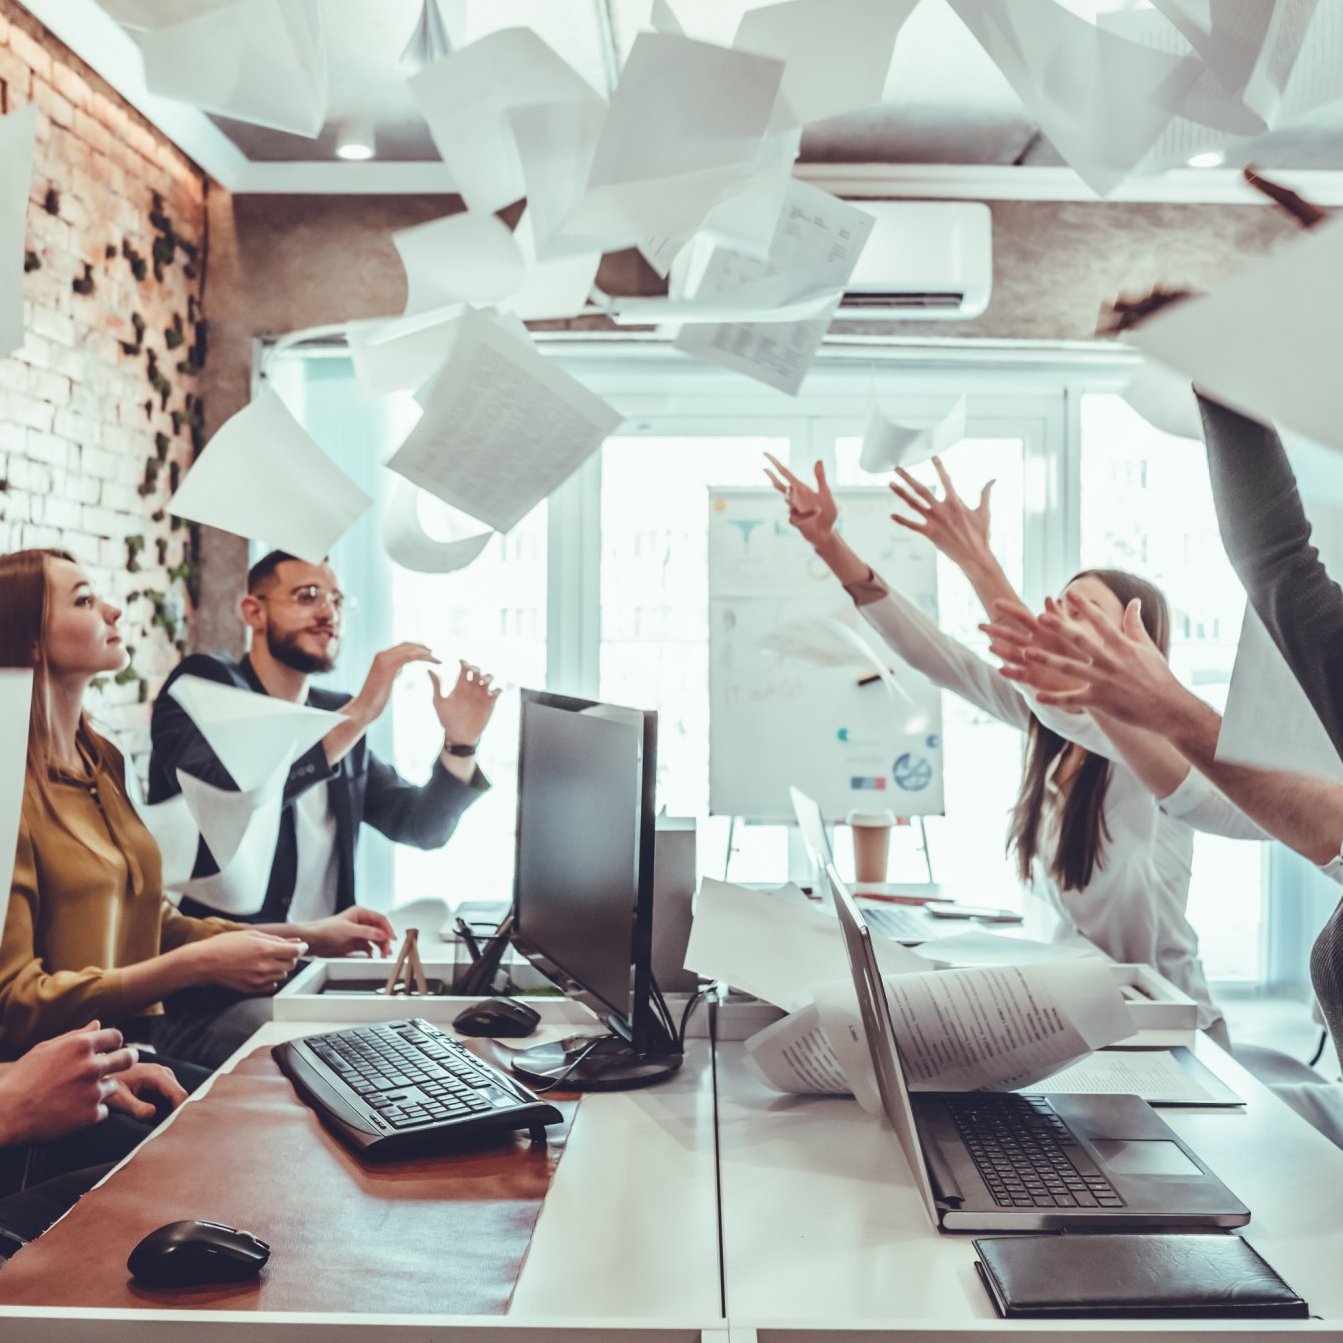 Article thumbnail: Smiling business people having fun by throwing papers in the air celebrating business success in the modern office. Happy workplace and casual career company concept.